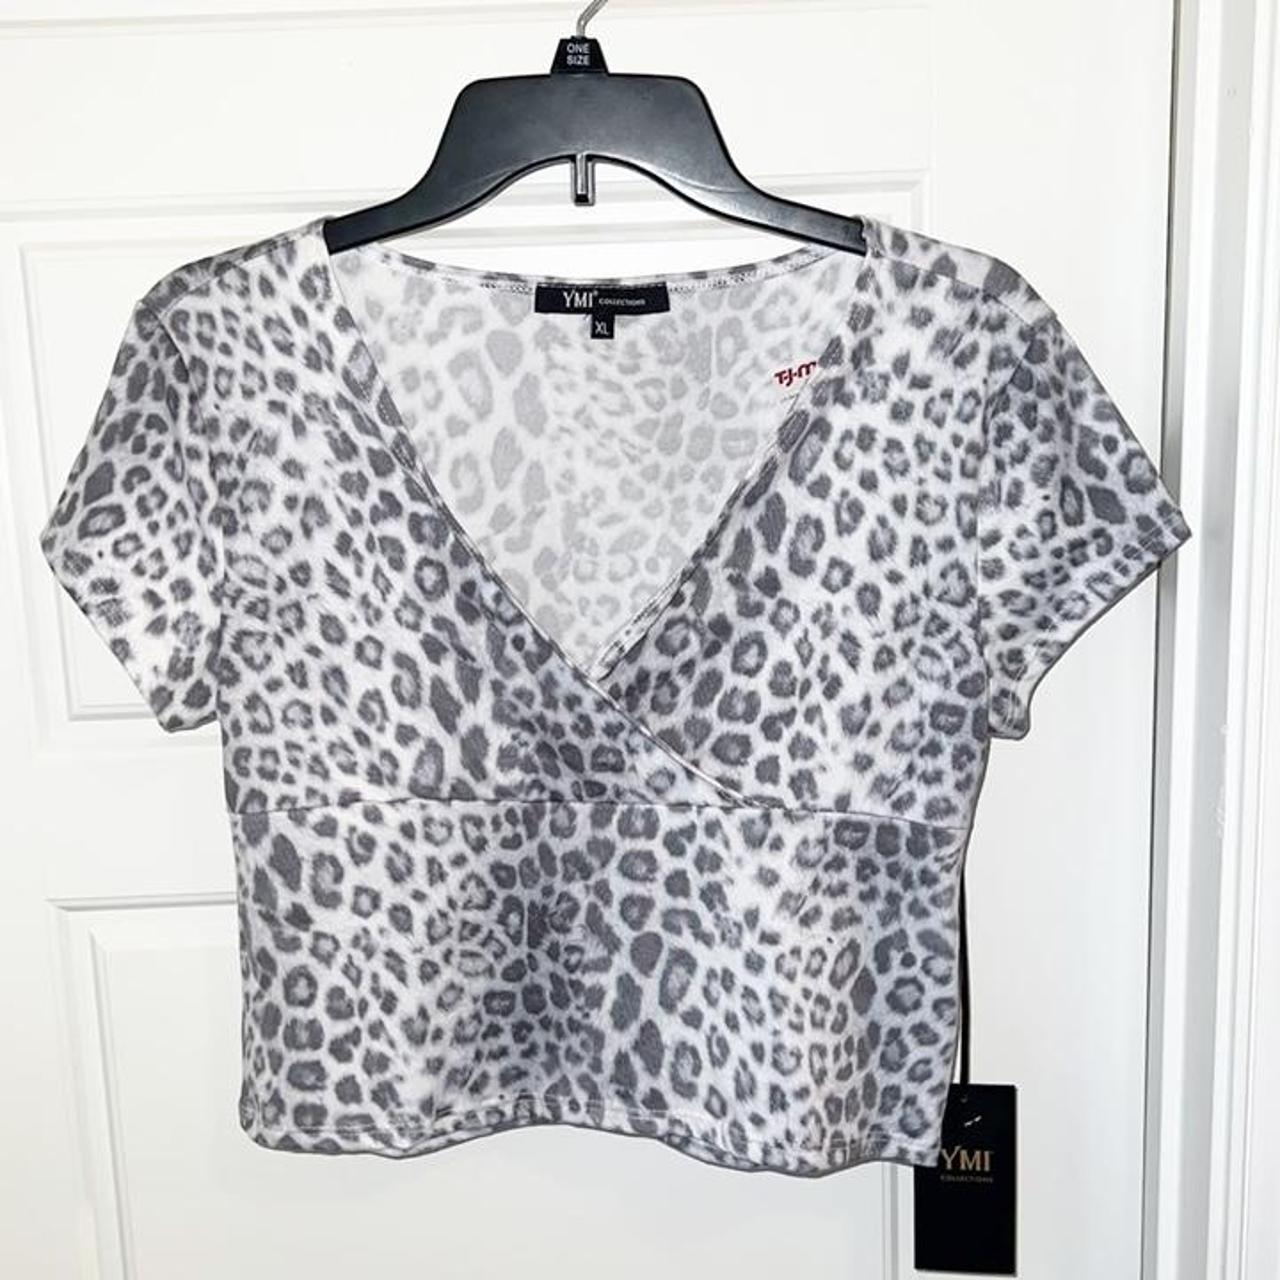 Product Image 1 - YMI Leopard Crop Top Size